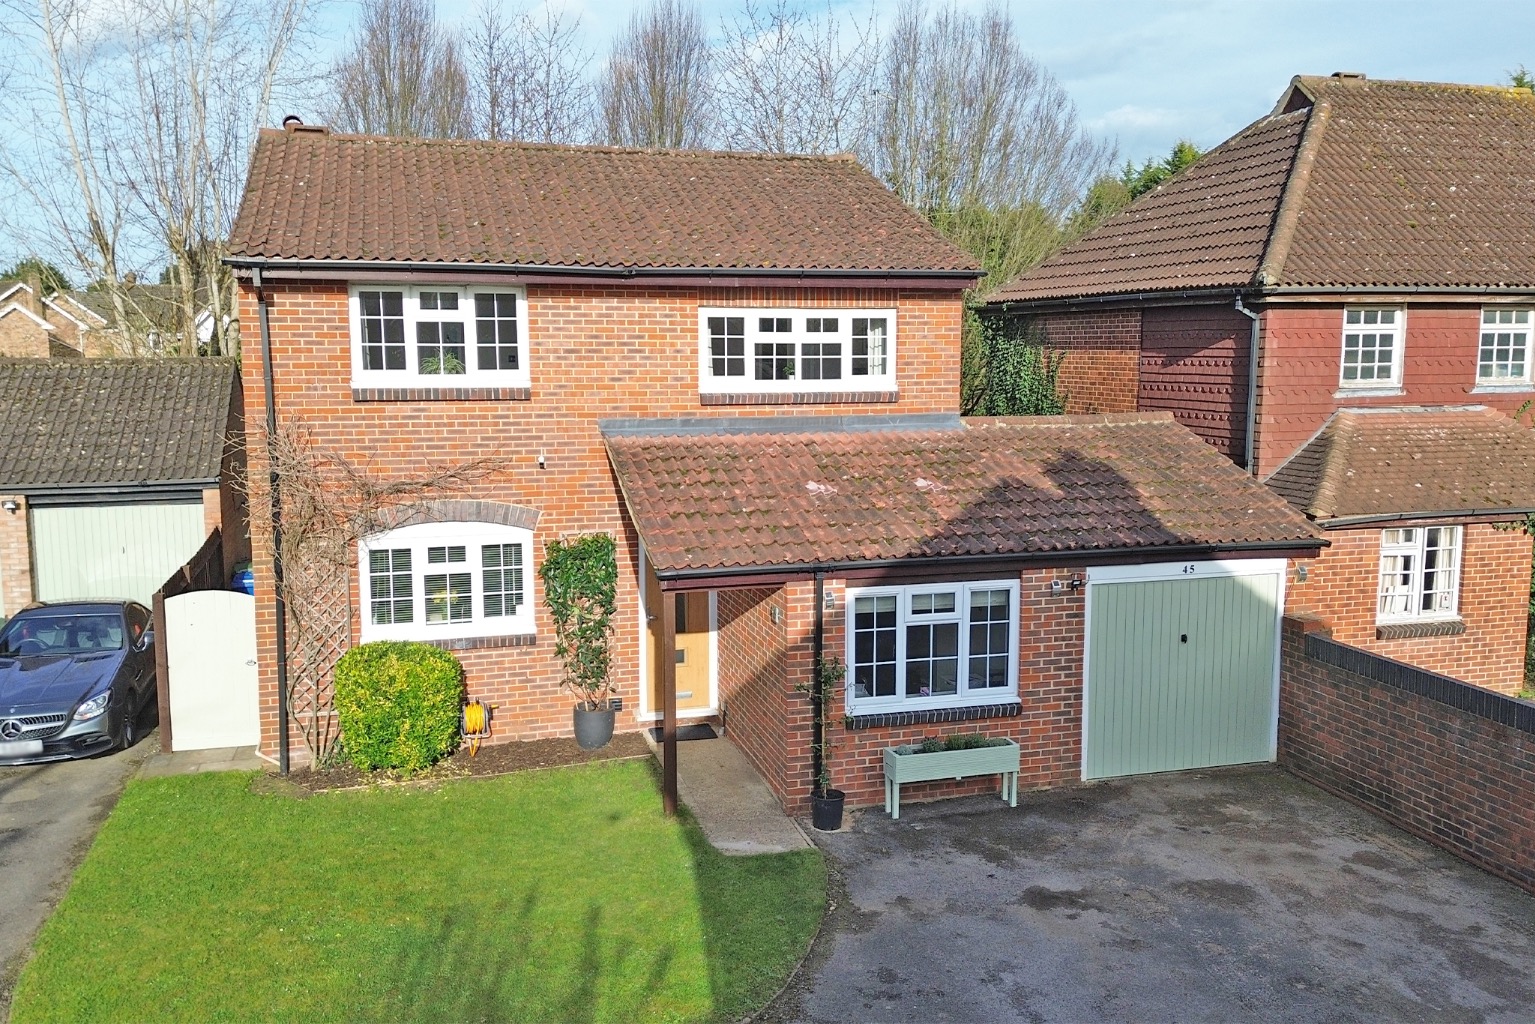 4 bed detached house for sale in Loosen Drive, Maidenhead - Property Image 1